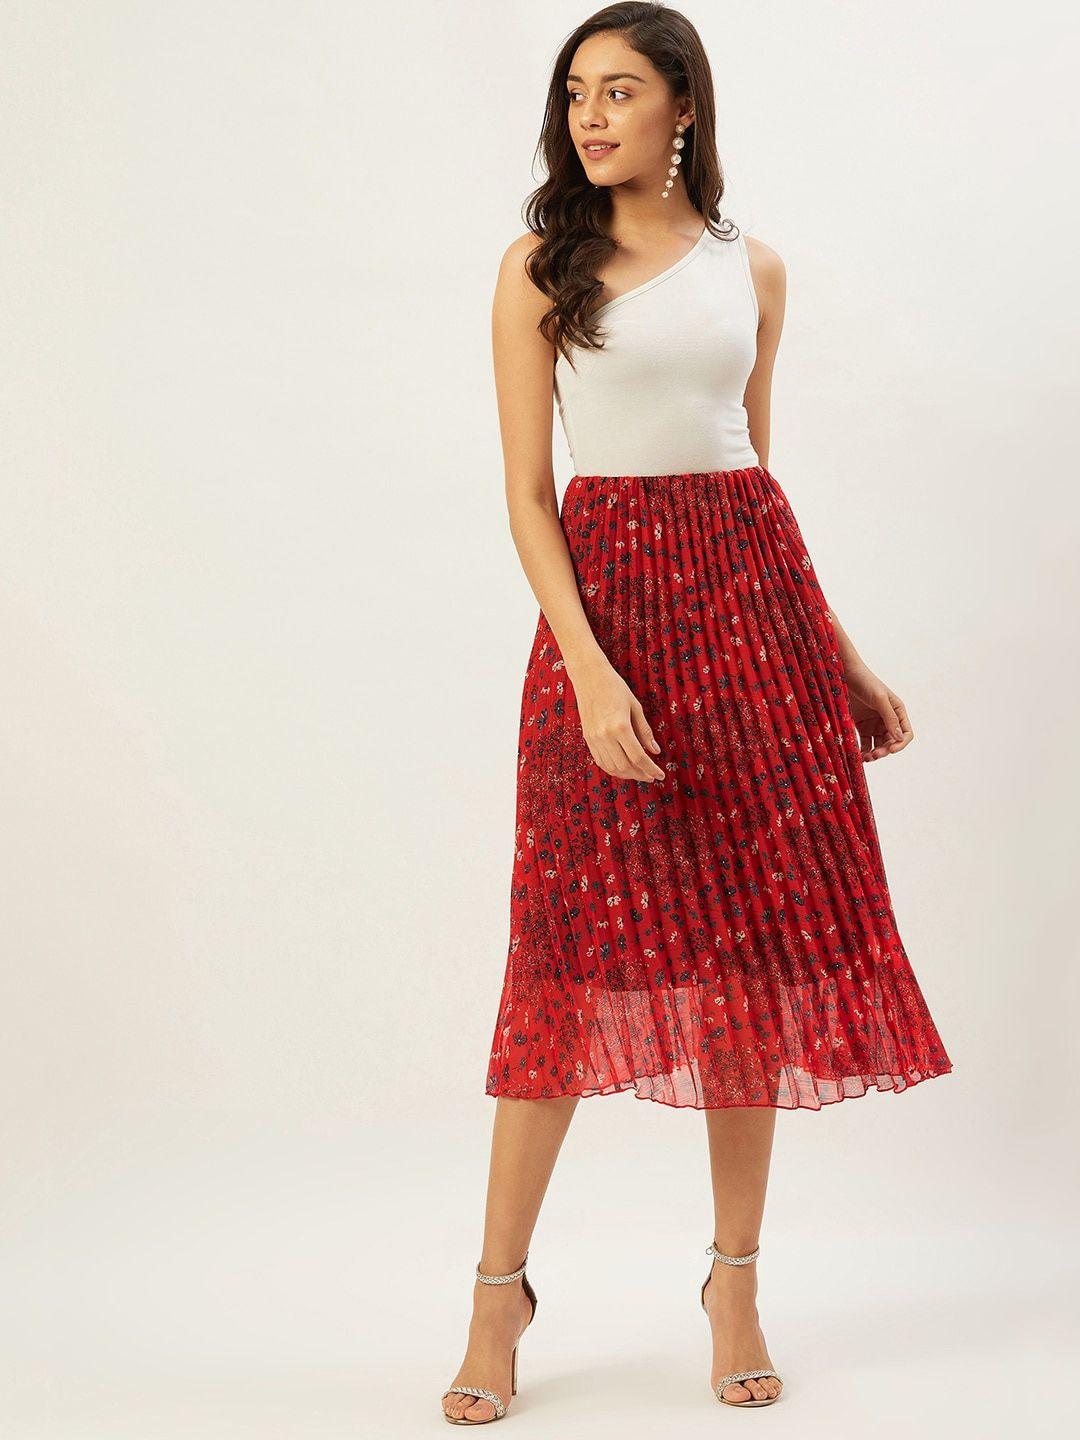 anvi-be-yourself-women-red-&-black-printed-a-line-midi-skirt